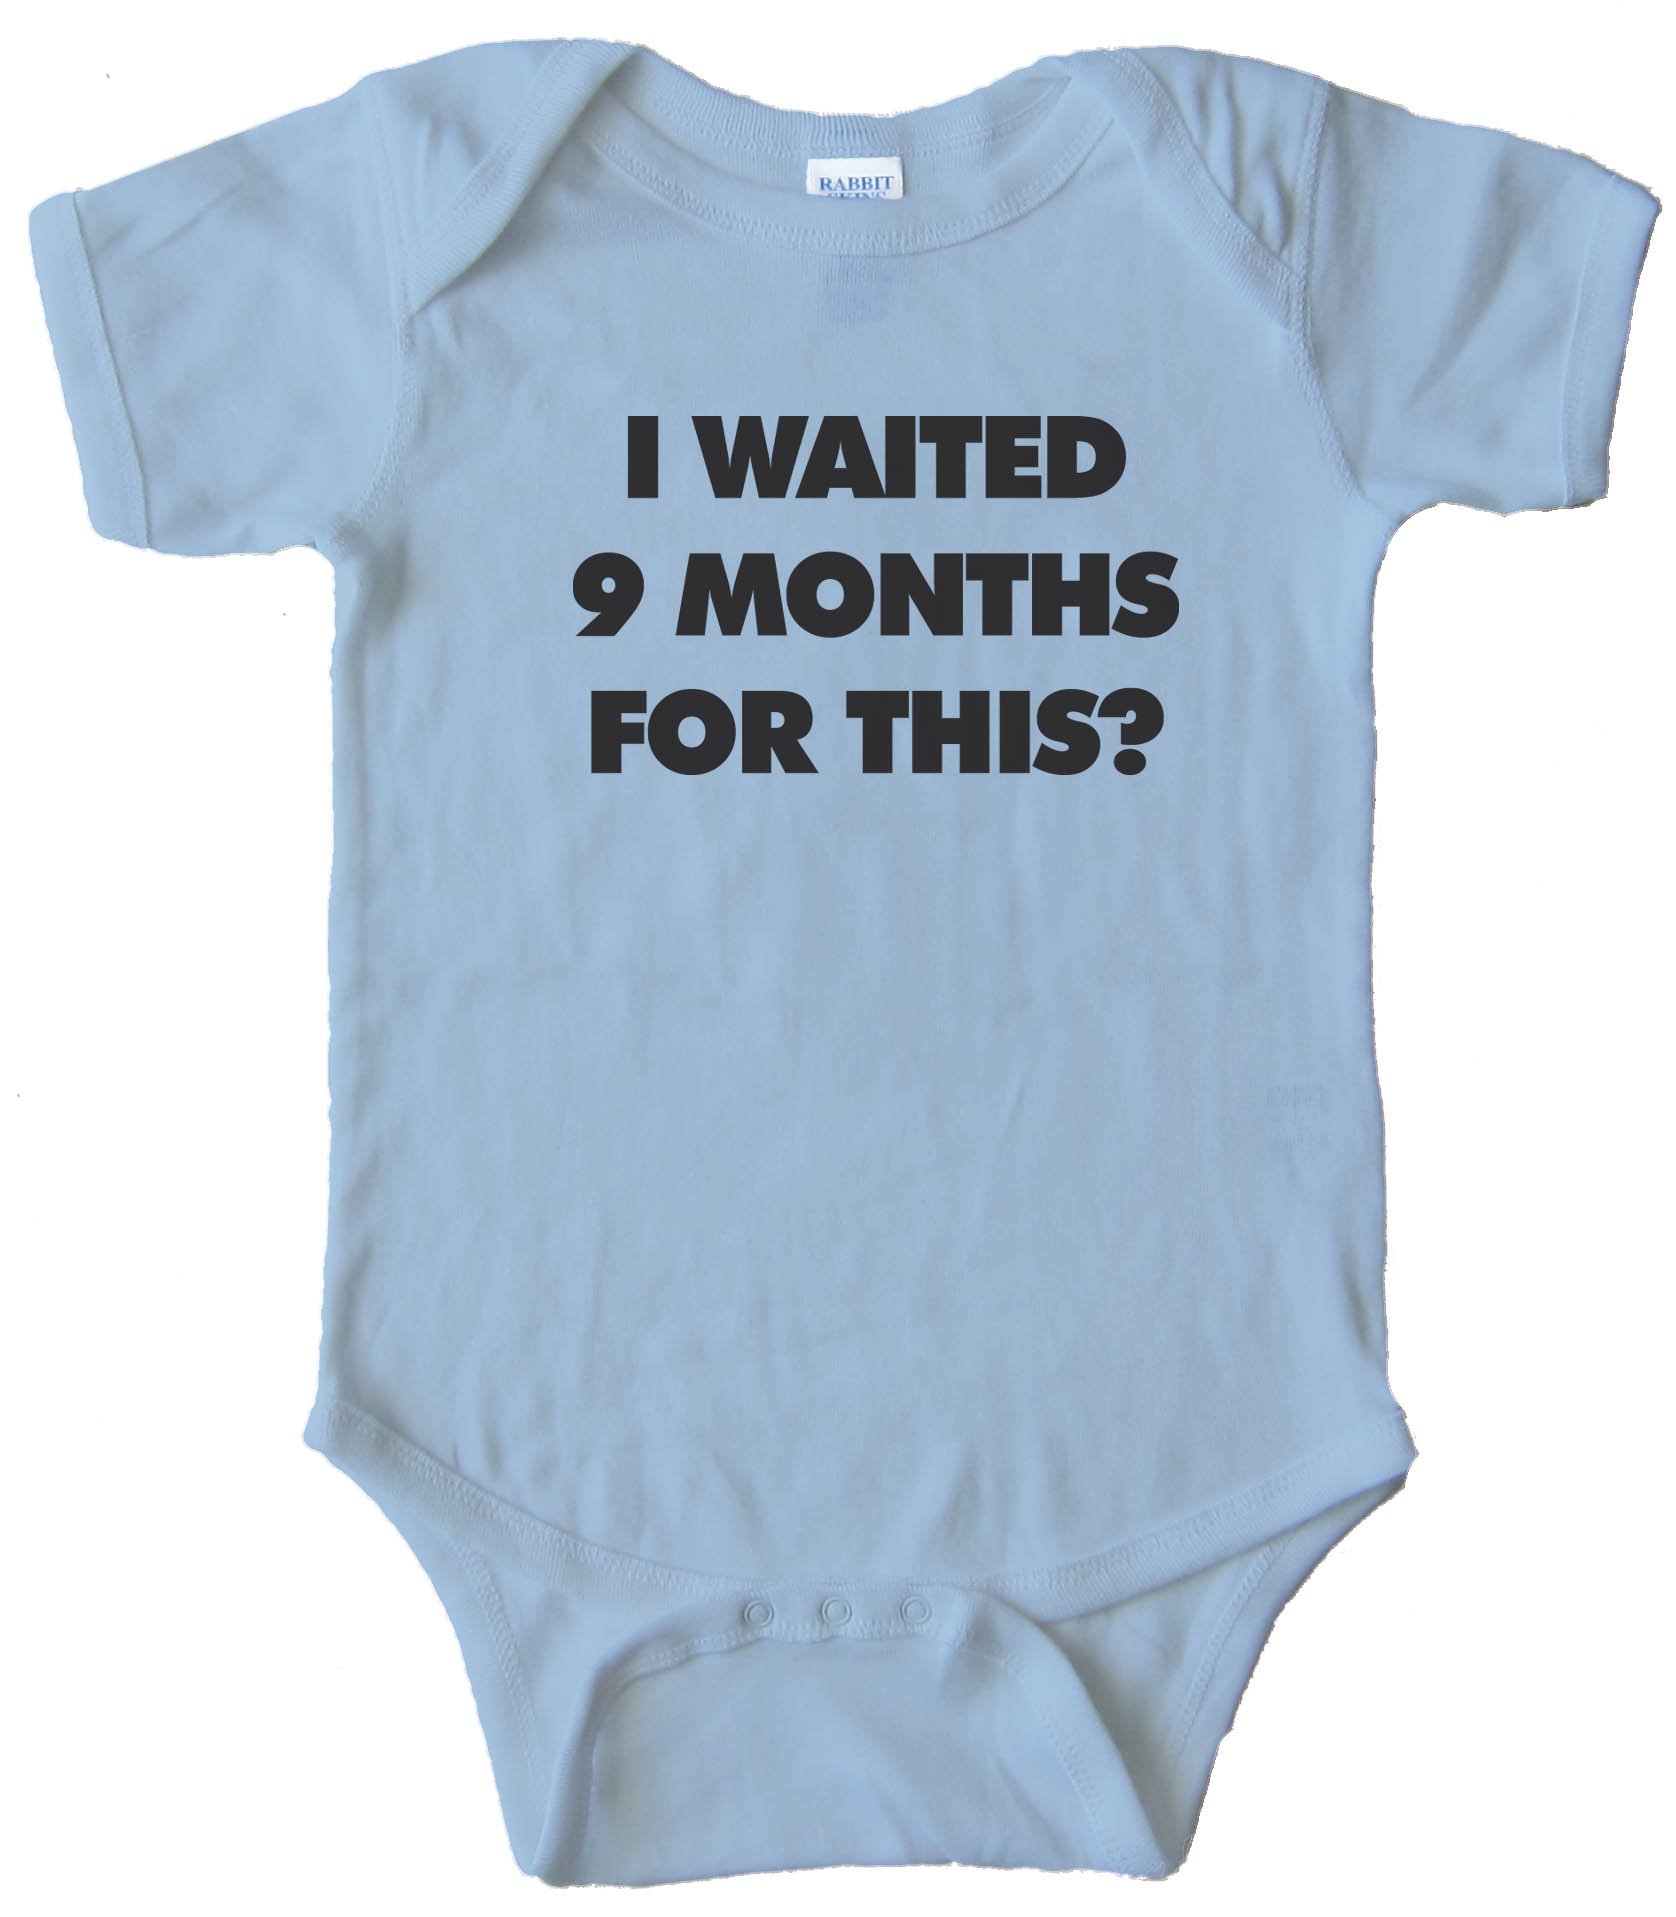 I Waited 9 Months For This? - Baby Bodysuit